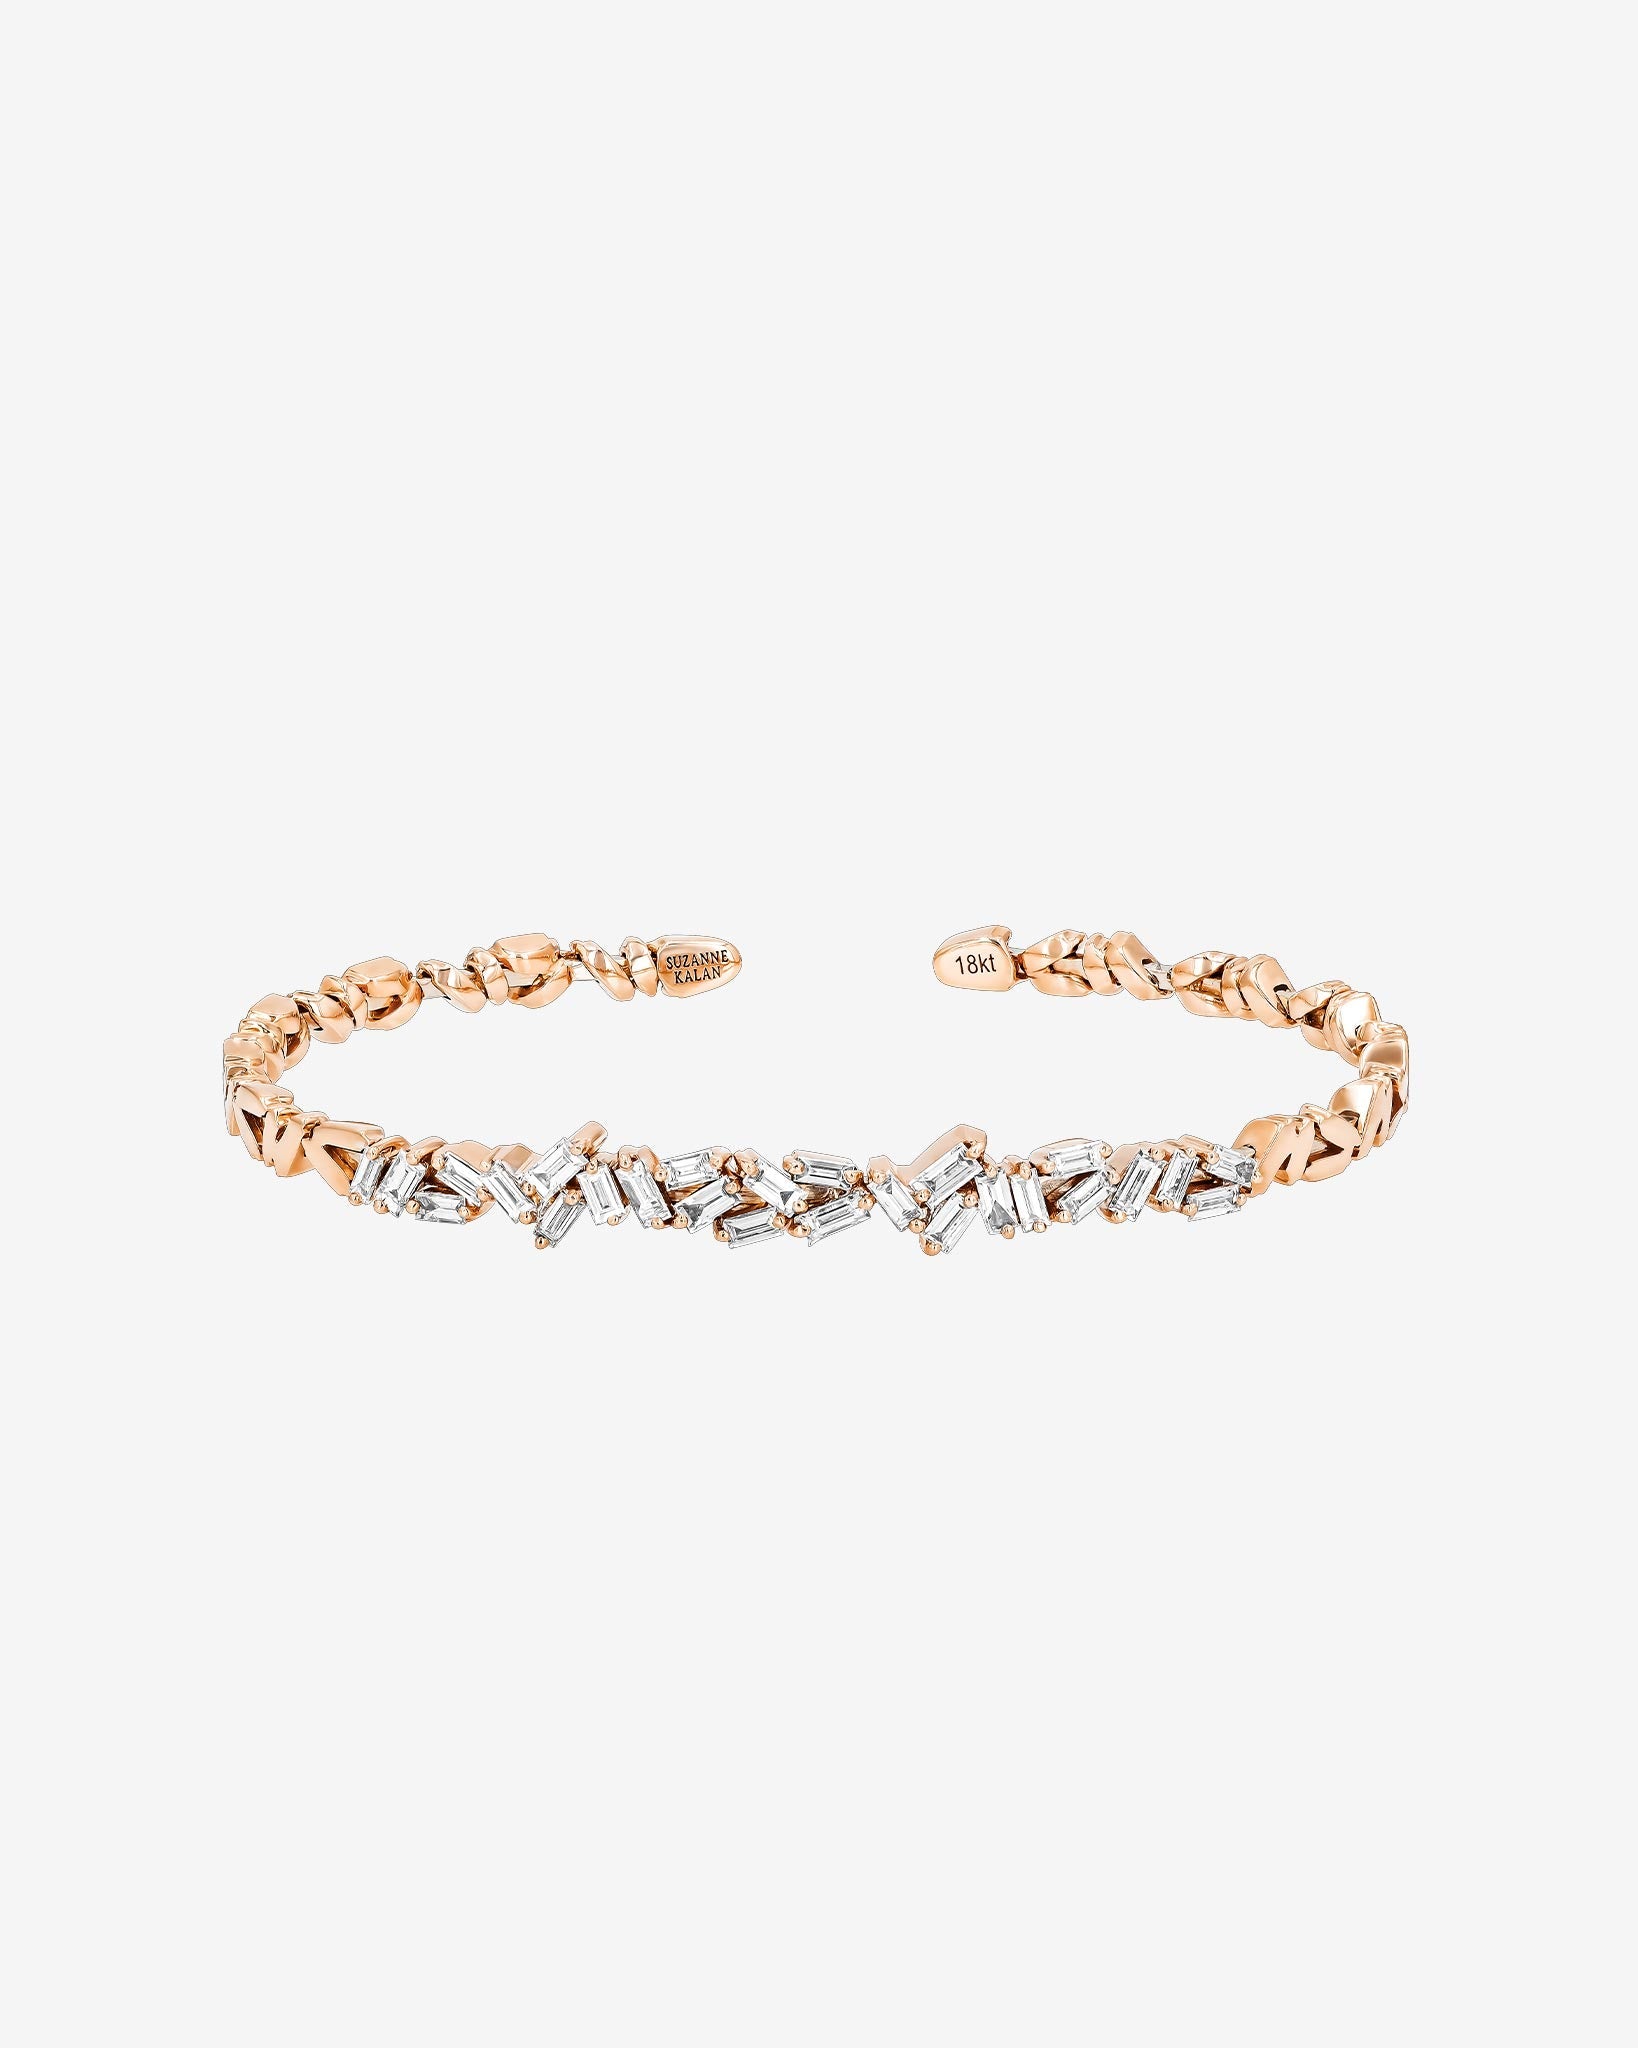 Suzanne Kalan Classic Diamond Cluster Bangle in 18k rose gold